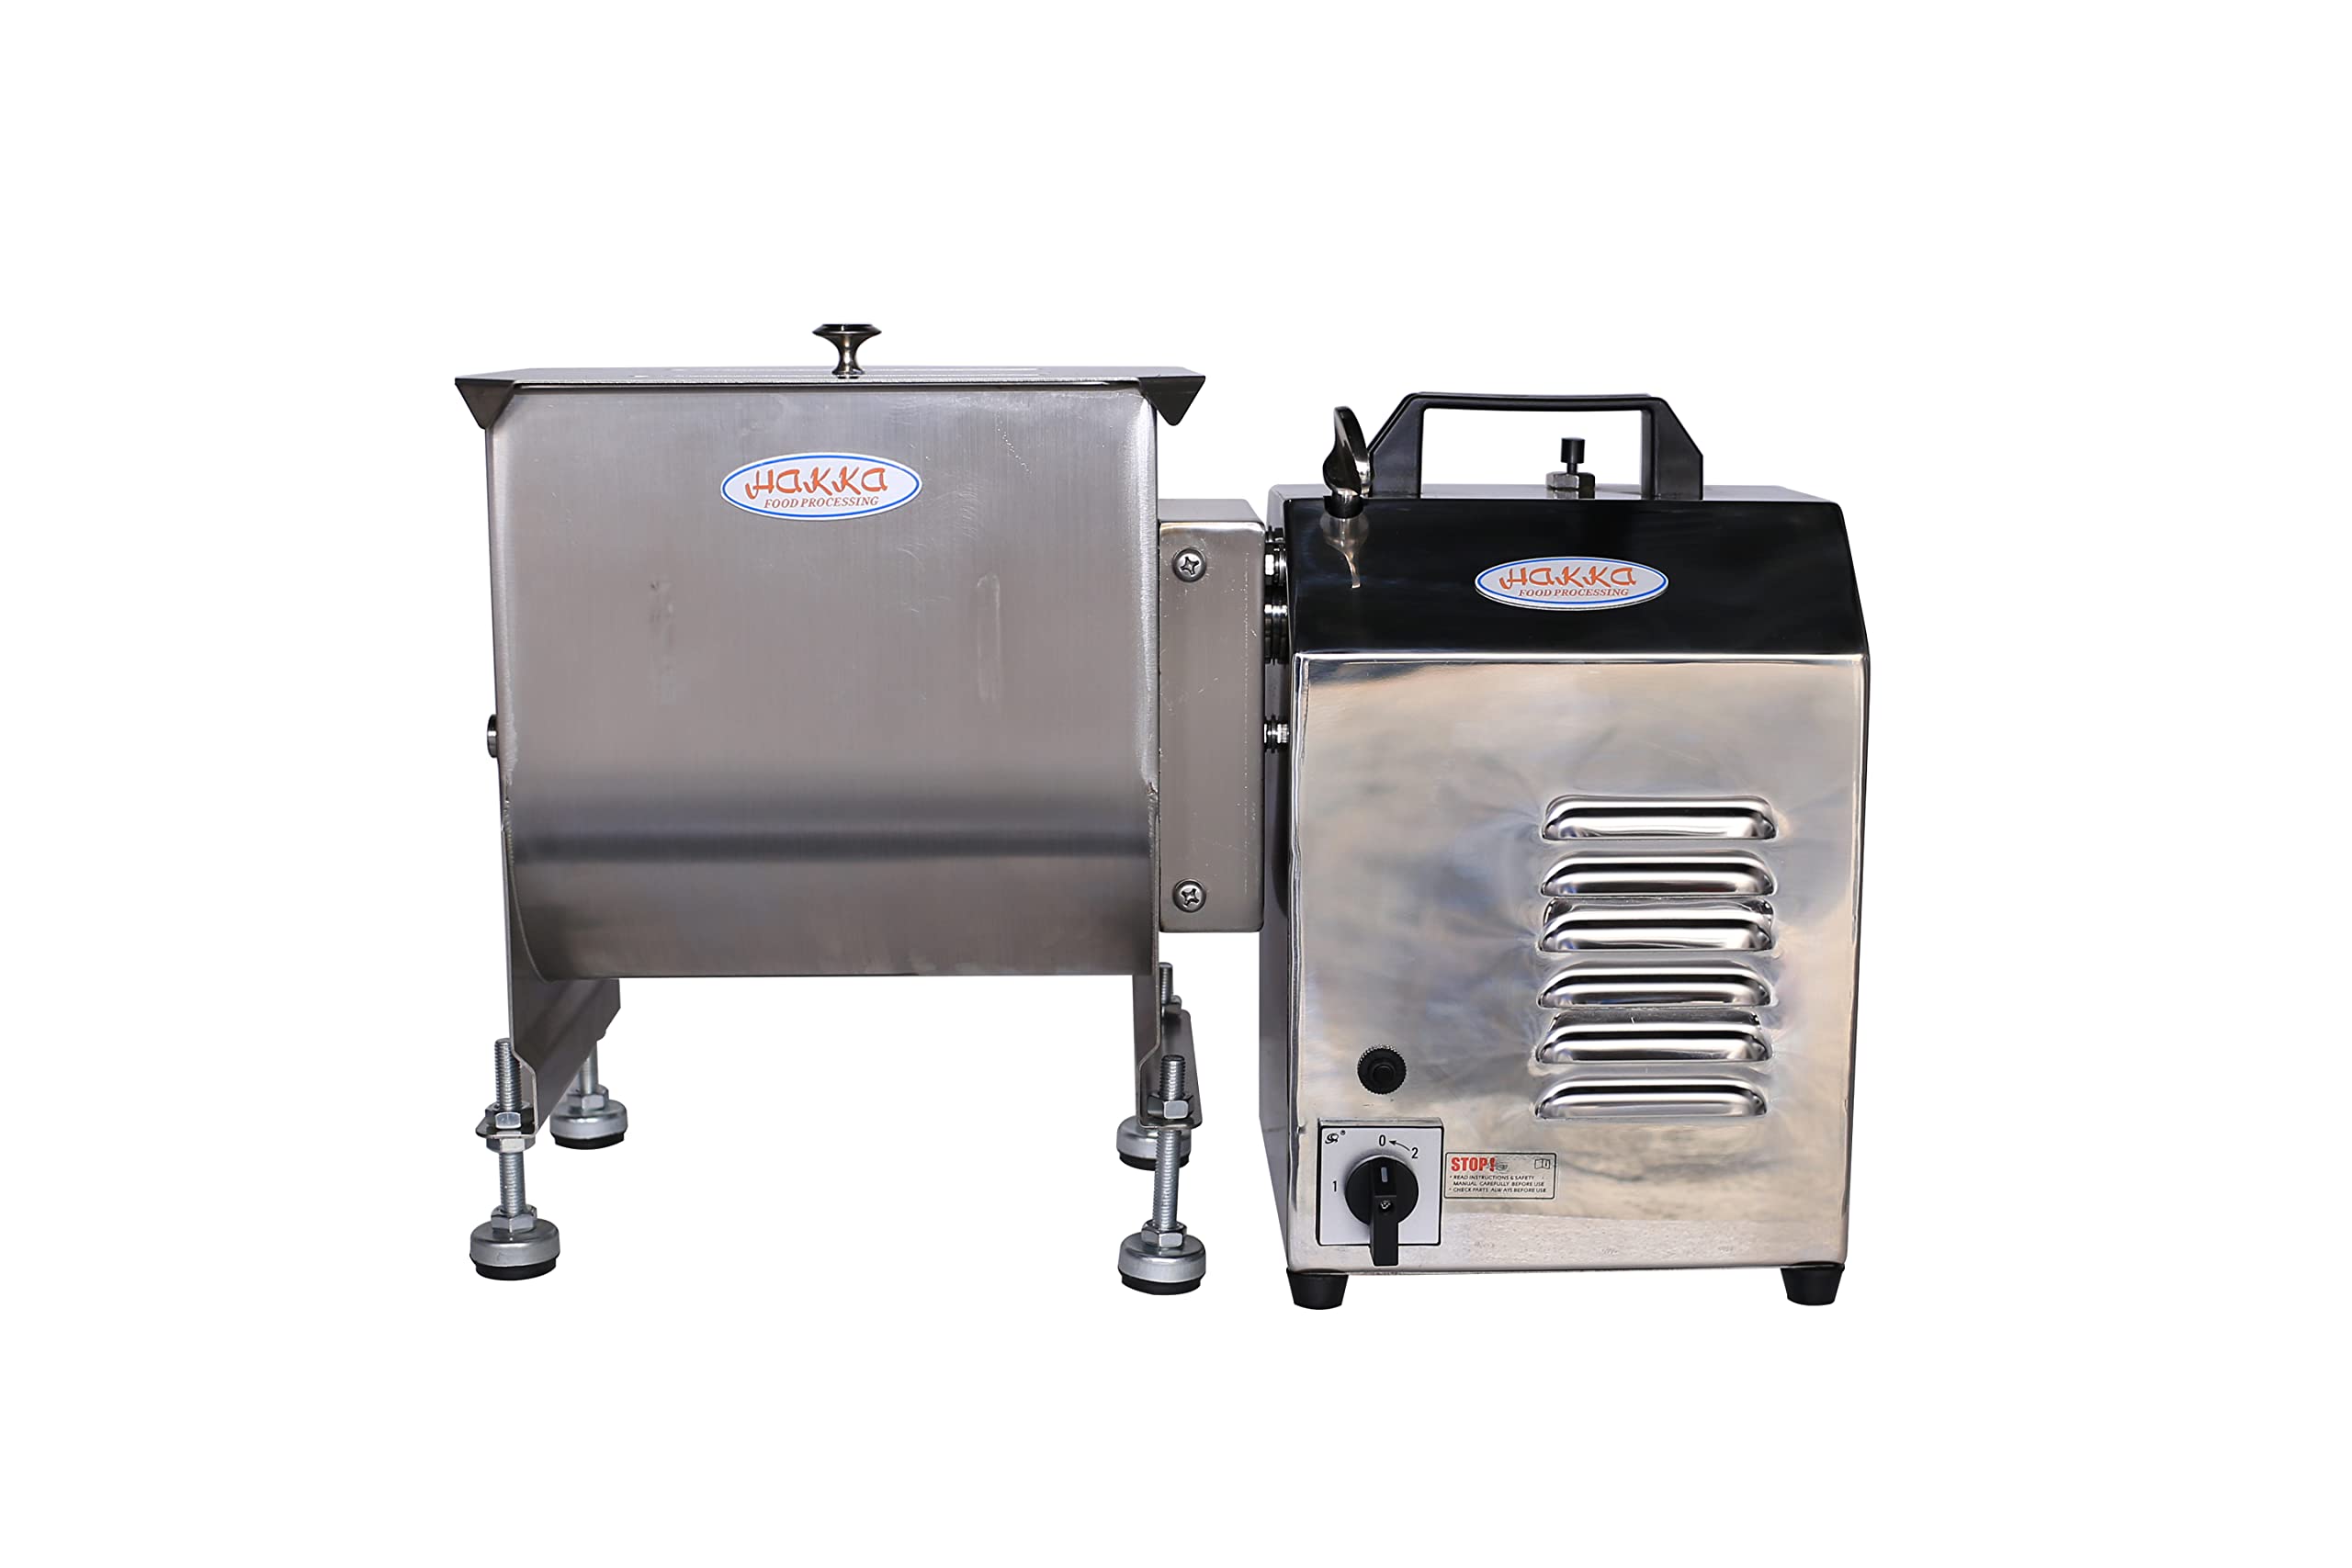 Hakka 15 Pound/7.5 Liter Capacity Tank Commercial Electric Meat Mixer with  Motor